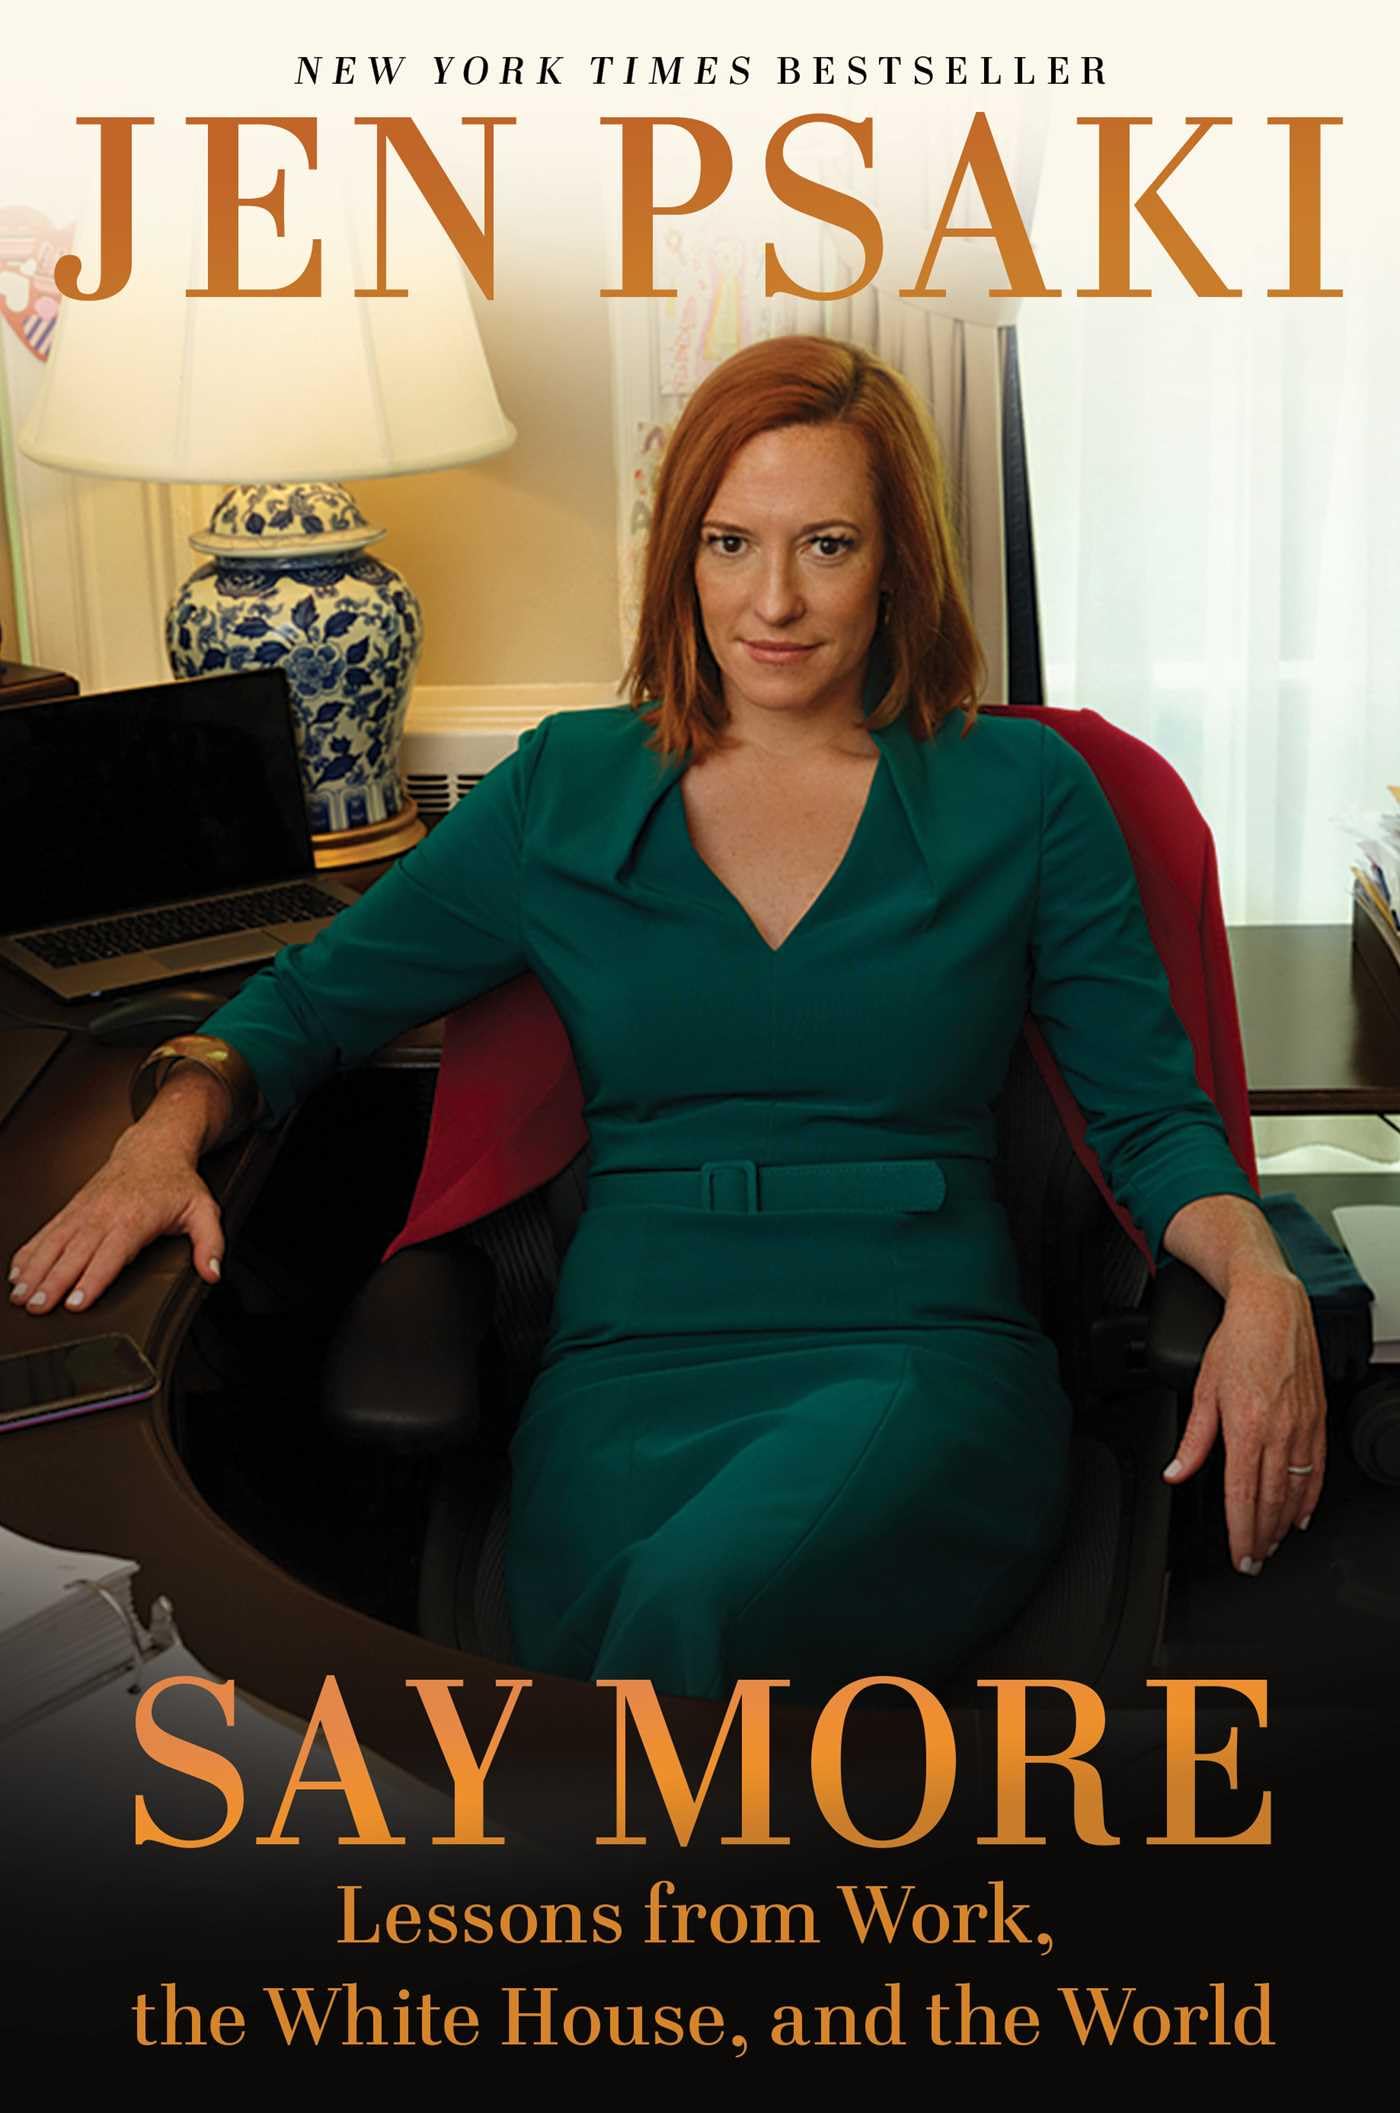 Say More: Lessons from Work, the White House, and the World by Psaki, Jen